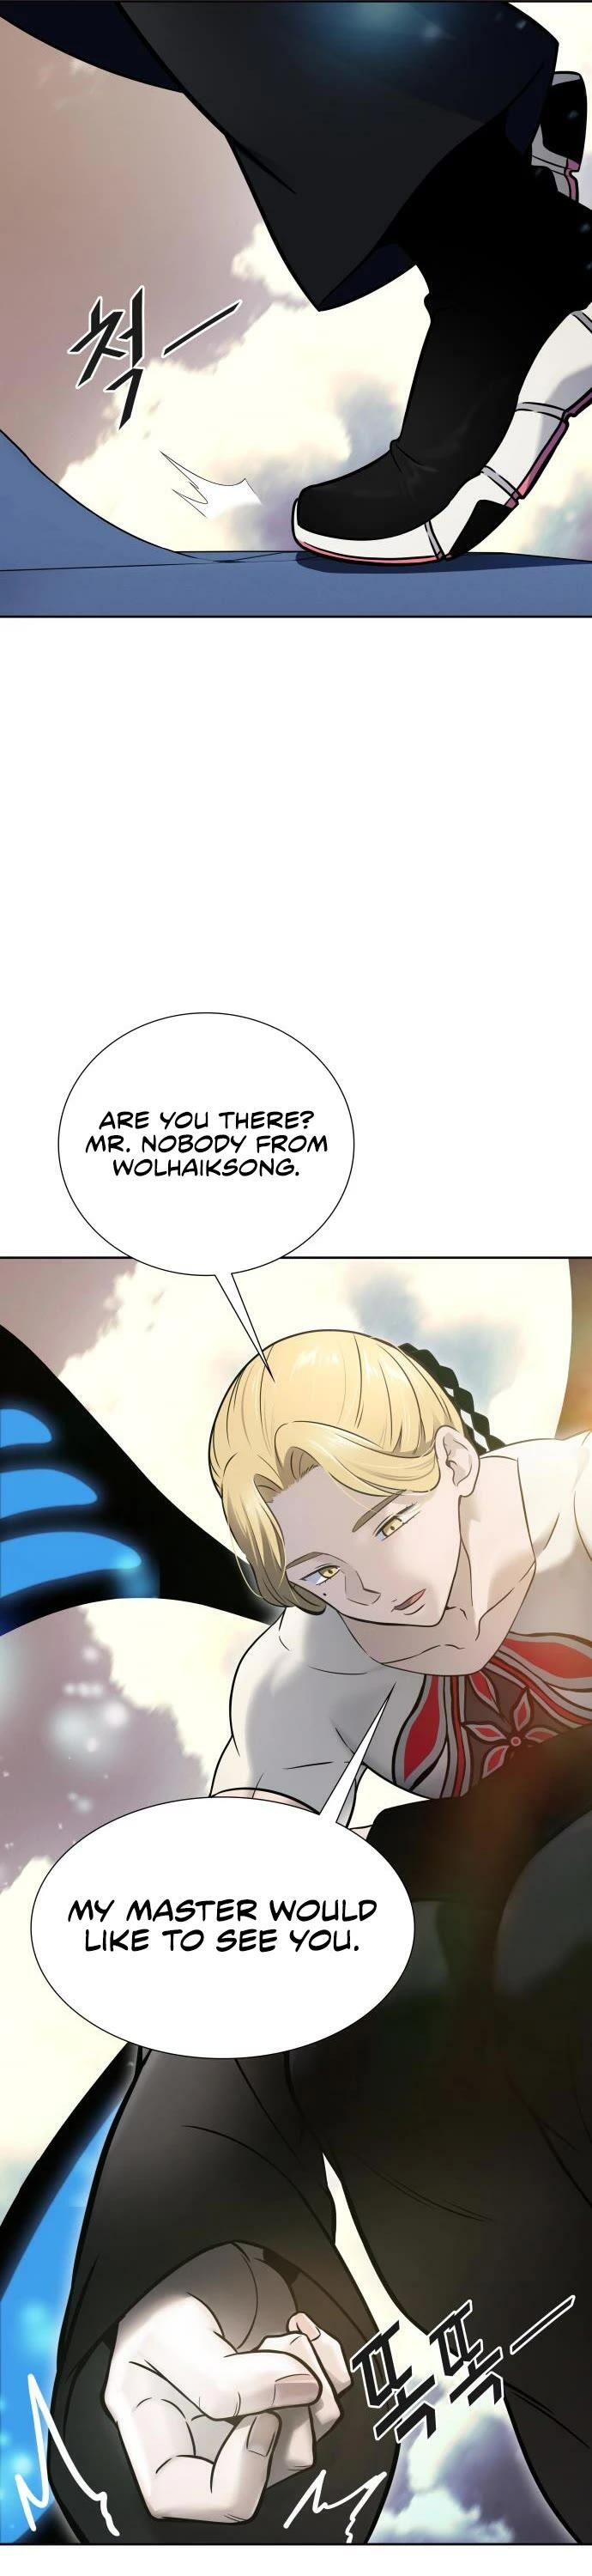 Tower Of God Chapter 597 by The Hokage